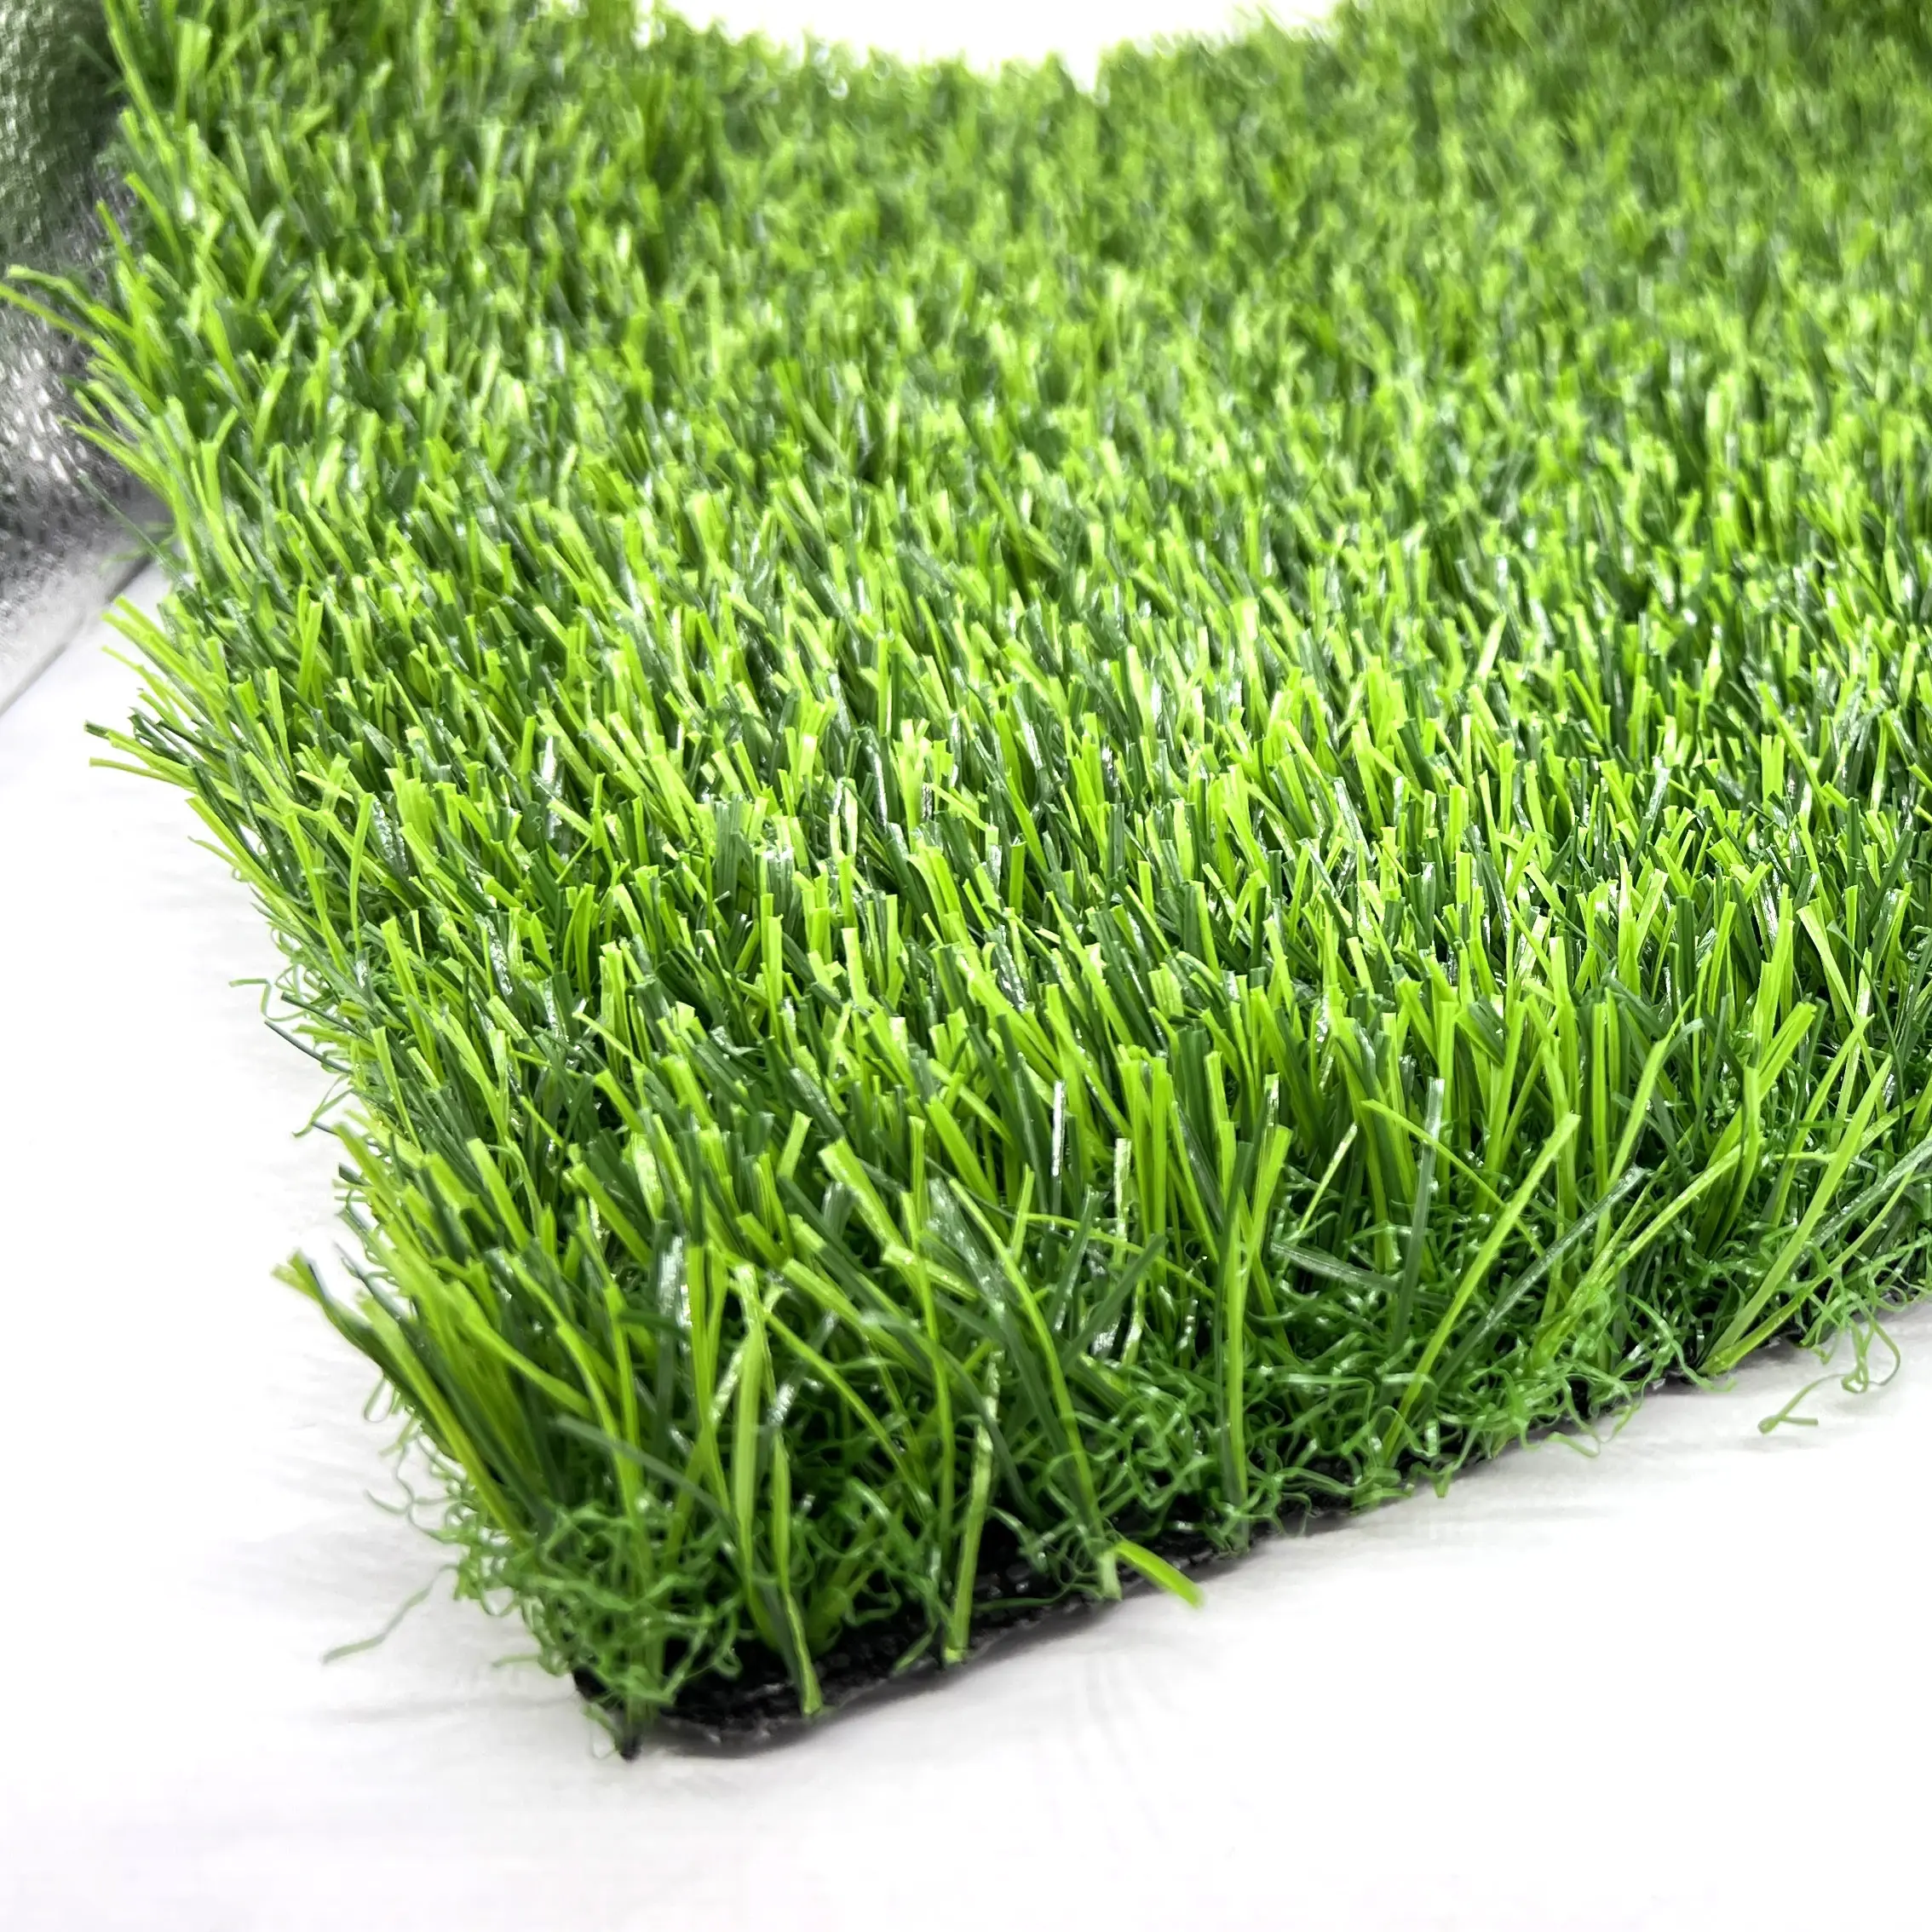 High quality natural landscape 40cm green lawn artificial grass artificial turf Outdoor lawn